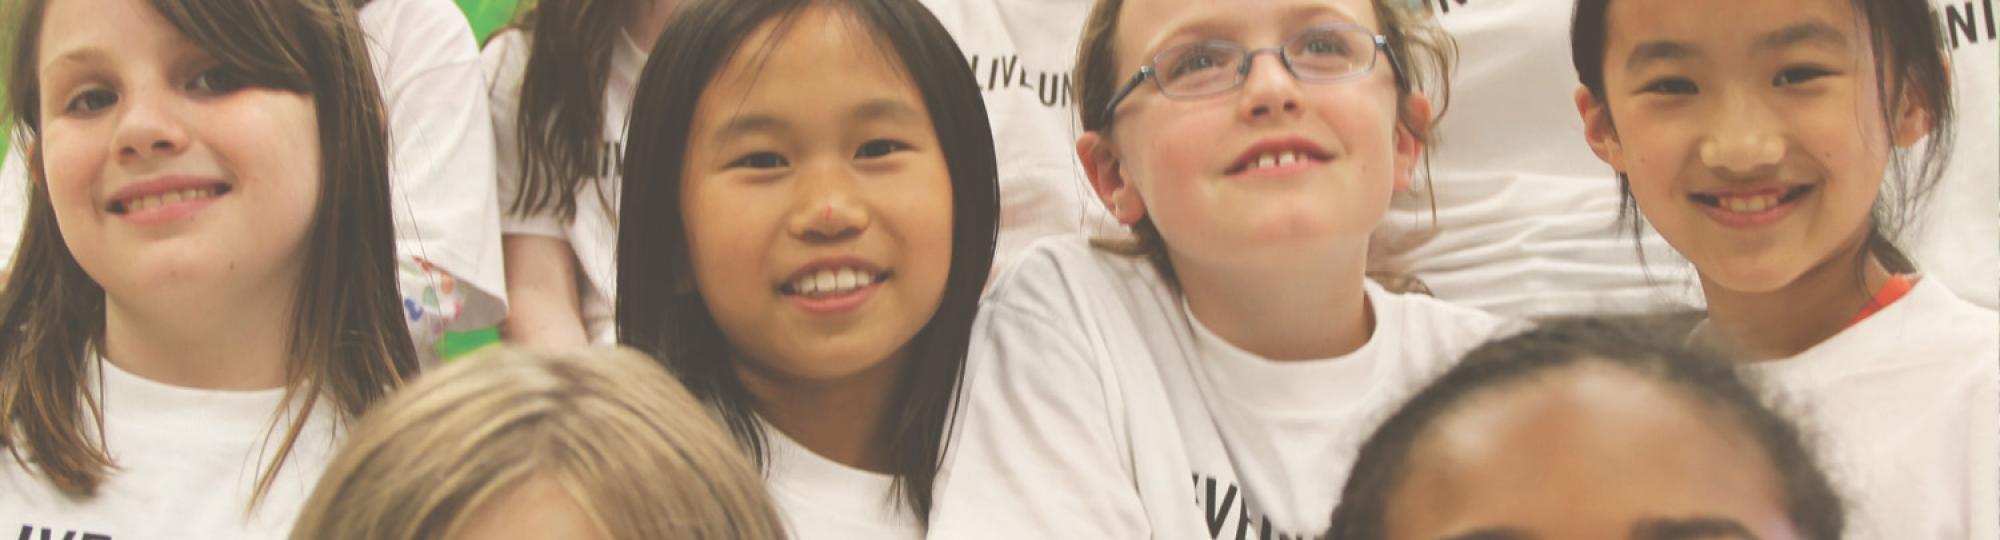 Smiling children wearing white tshirts that say LIVE UNITED